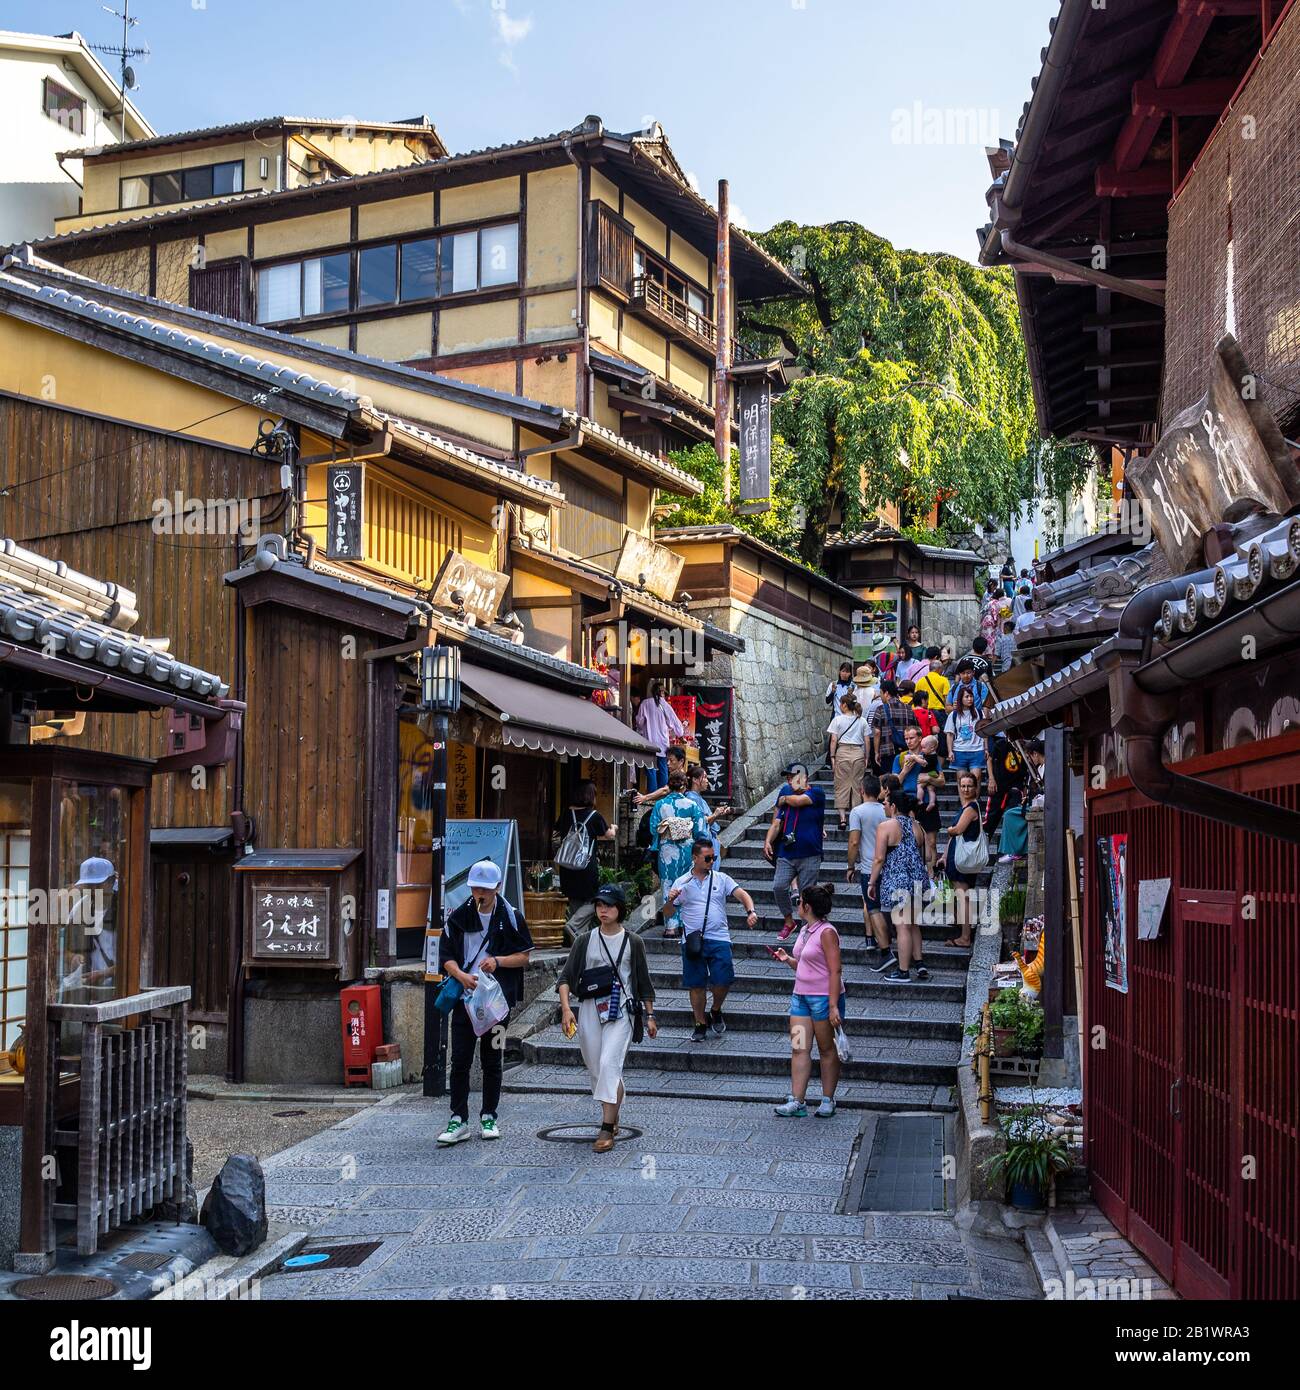 Kyoto, Japan, August 18, 2019 – View of Sannenzaka, a typical lively street in Higashiyama historic district of Kyoto Stock Photo